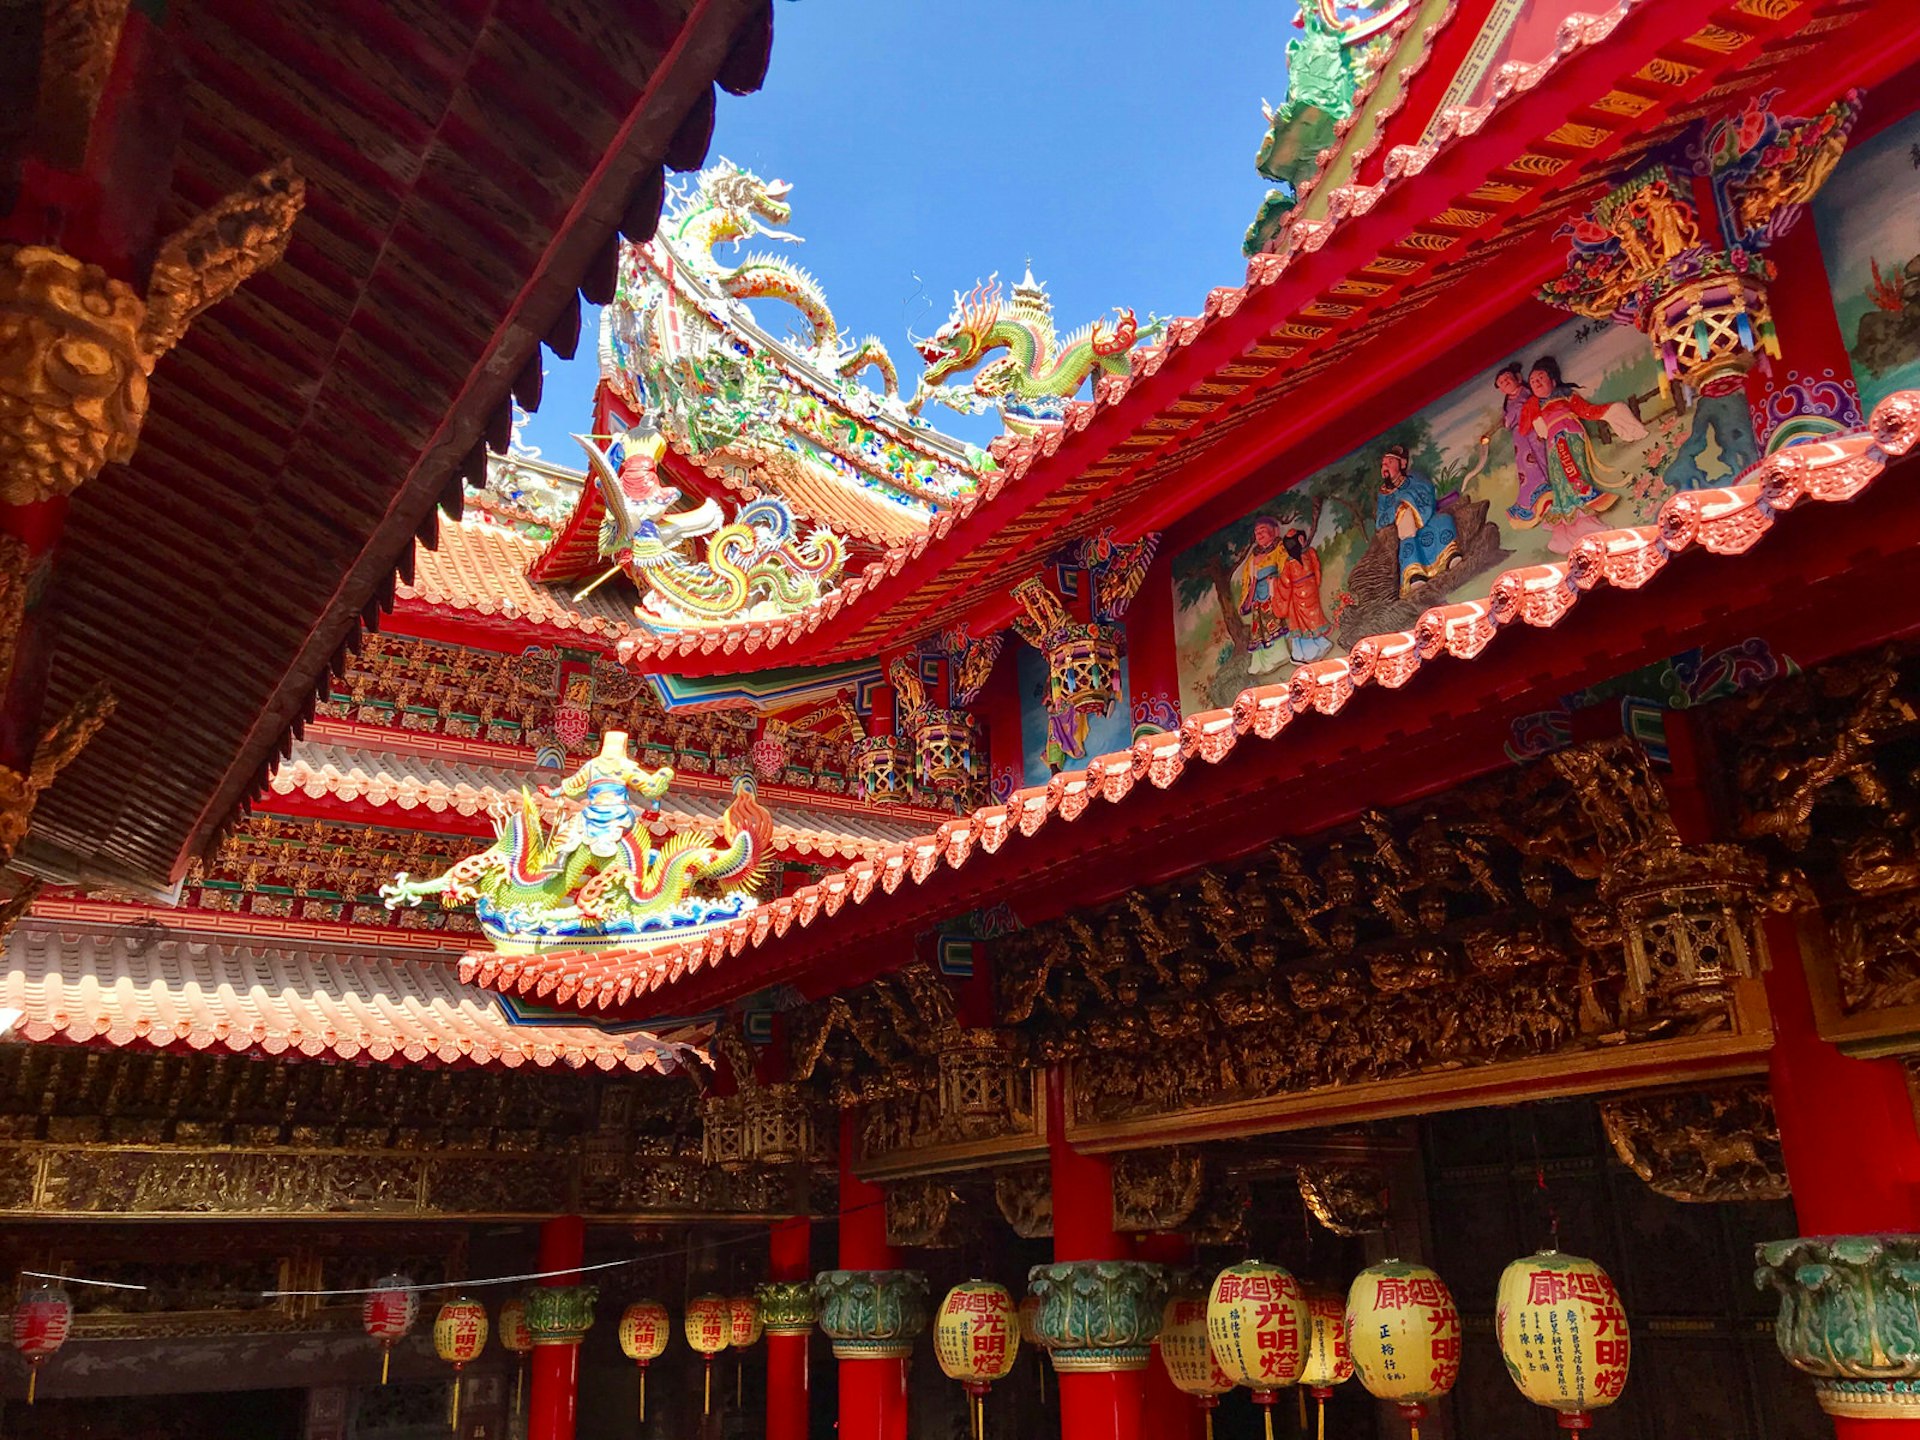 Colourful temple with upturned eaves, red tiled roofs, lanterns and multi-coloured dragon motifs. Lu'ermen Tianhou Temple in Tainan, Taiwan's oldest city, with colourful pottery and glass figurines © Piera Chen / Lonely Planet © Piera Chen / Lonely Planet